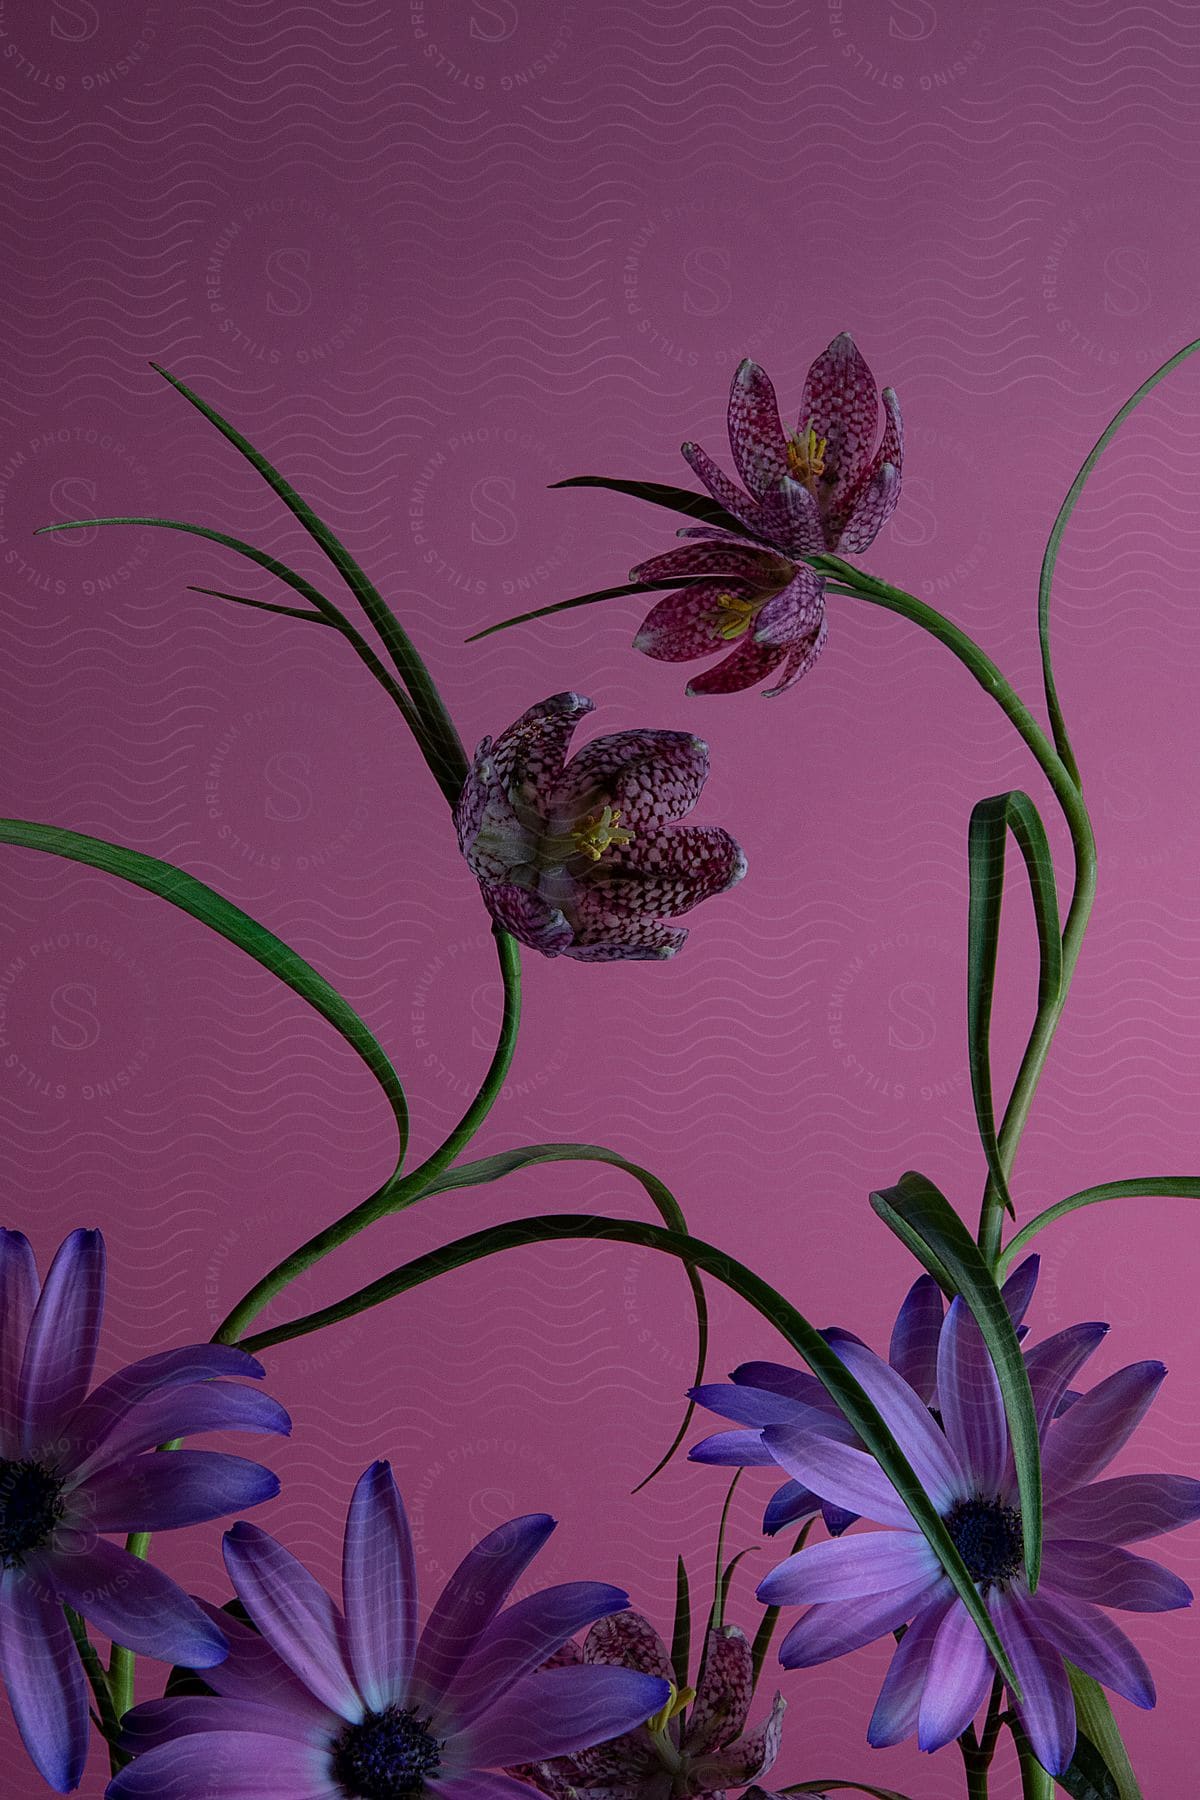 Collection of purple and pink flowers with green stems against a pink background.